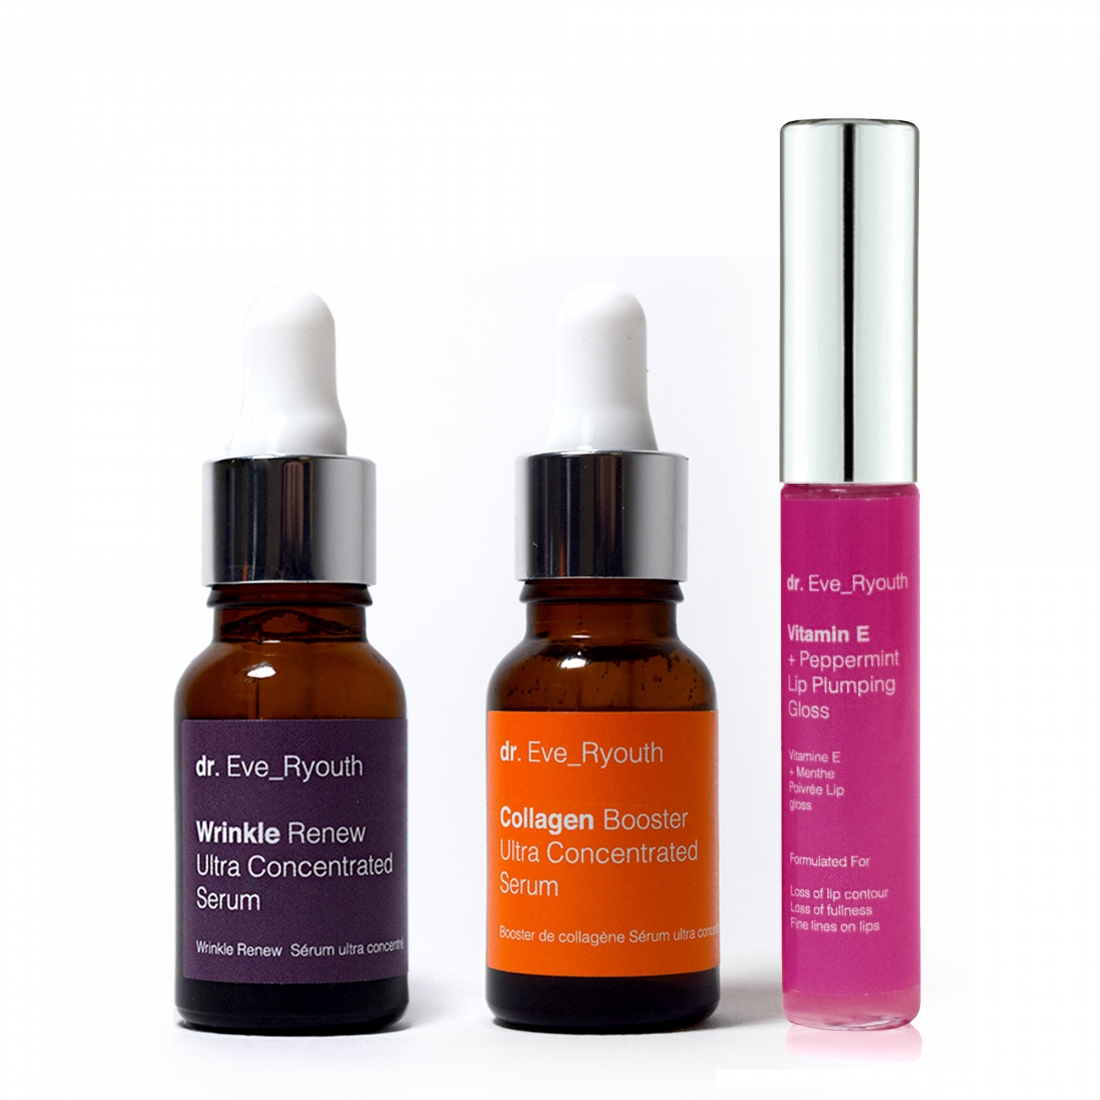 'Collagen Booster And Wrinkle Renew' Anti-Aging Care Set - 3 Pieces